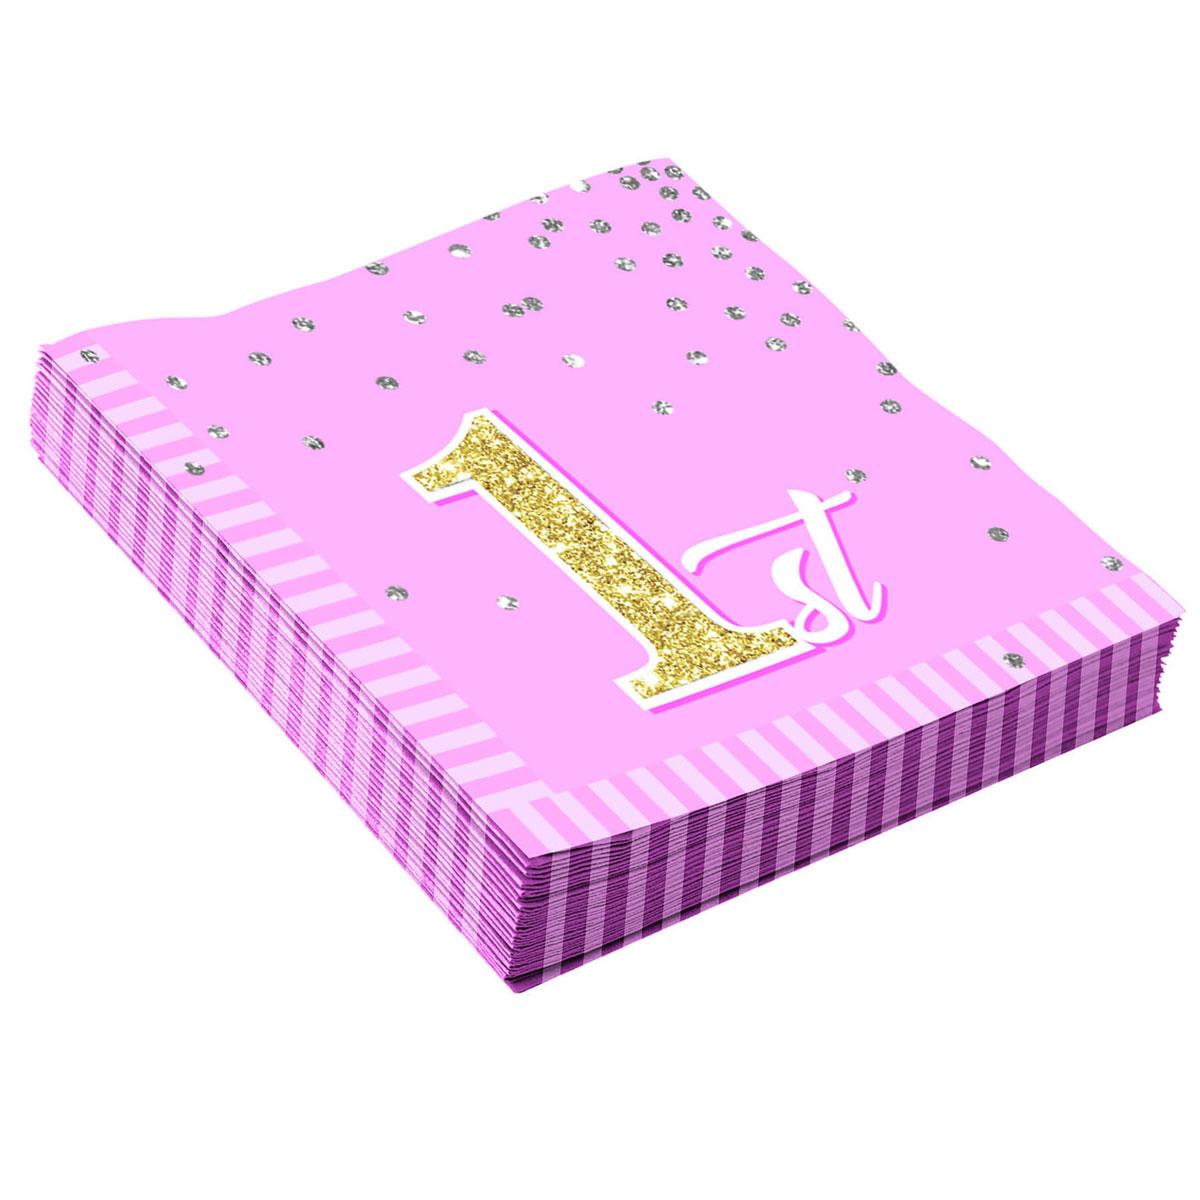 Baby's 1st Birthday 33cm lunch paper napkin in pink by Forum Novelties 79815 available here at Karnival Costumes online party shop